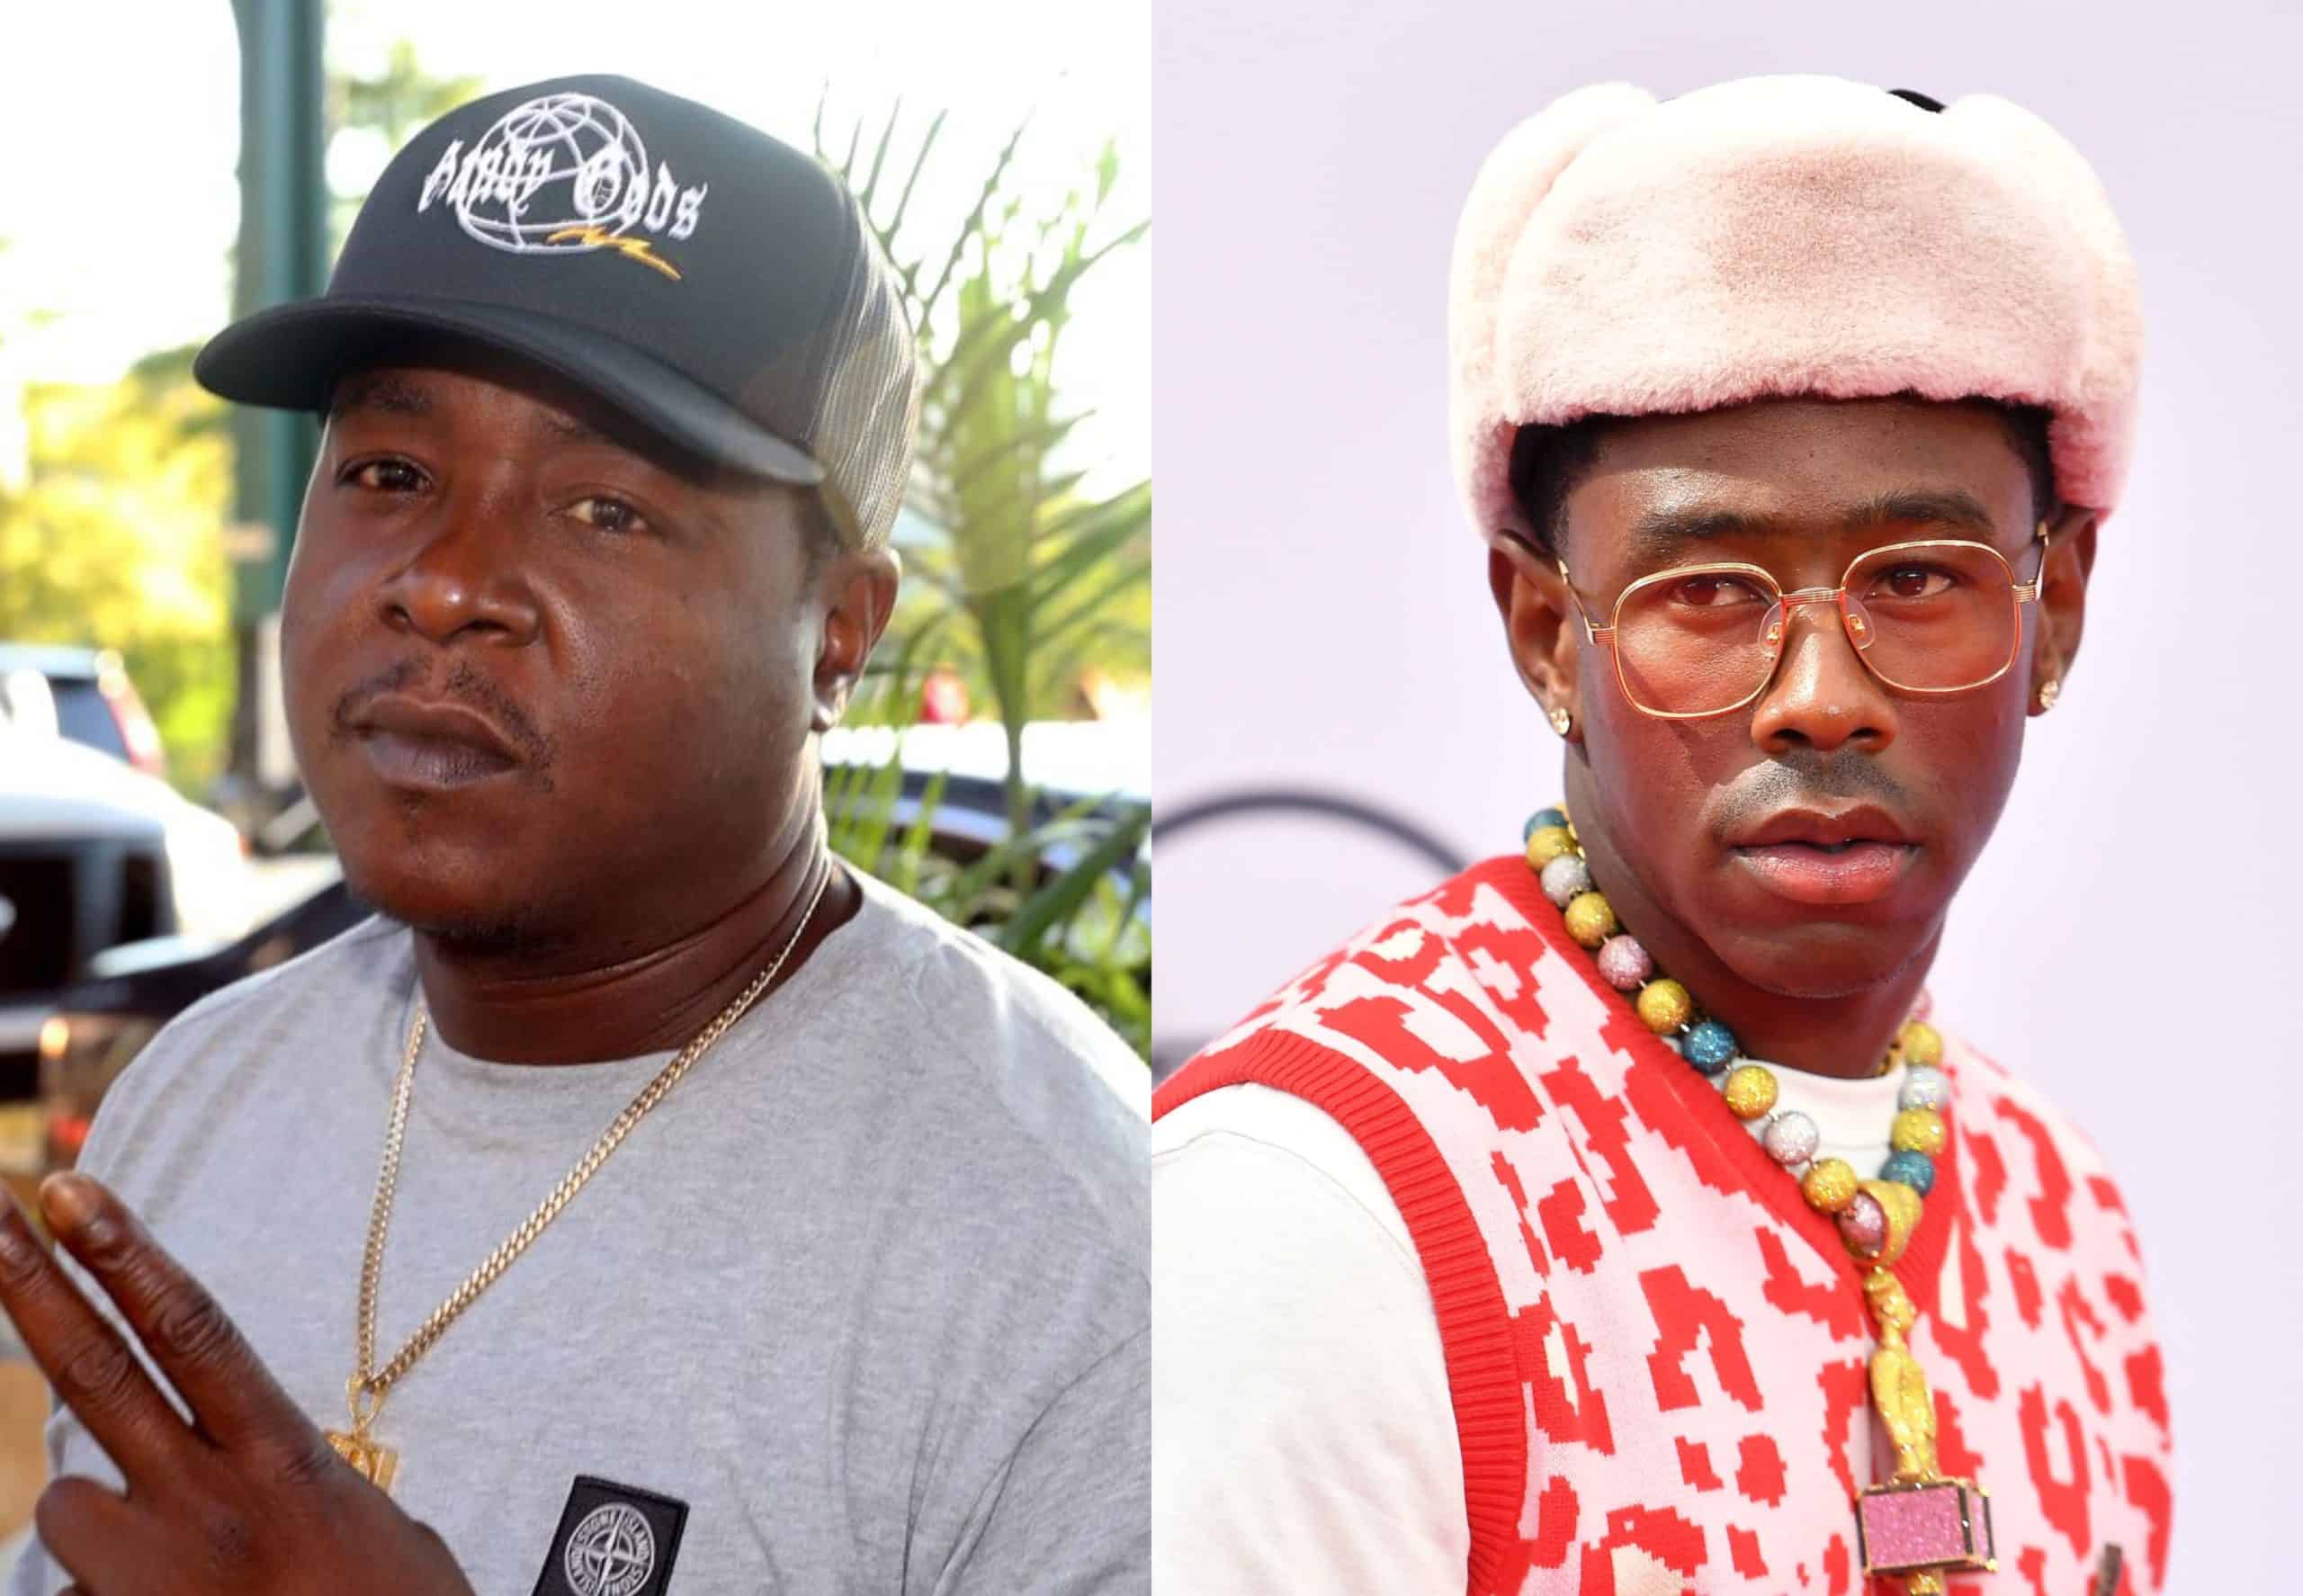 Jadakiss Reacts To Tyler, The Creator Saying He Has A Crush On Him